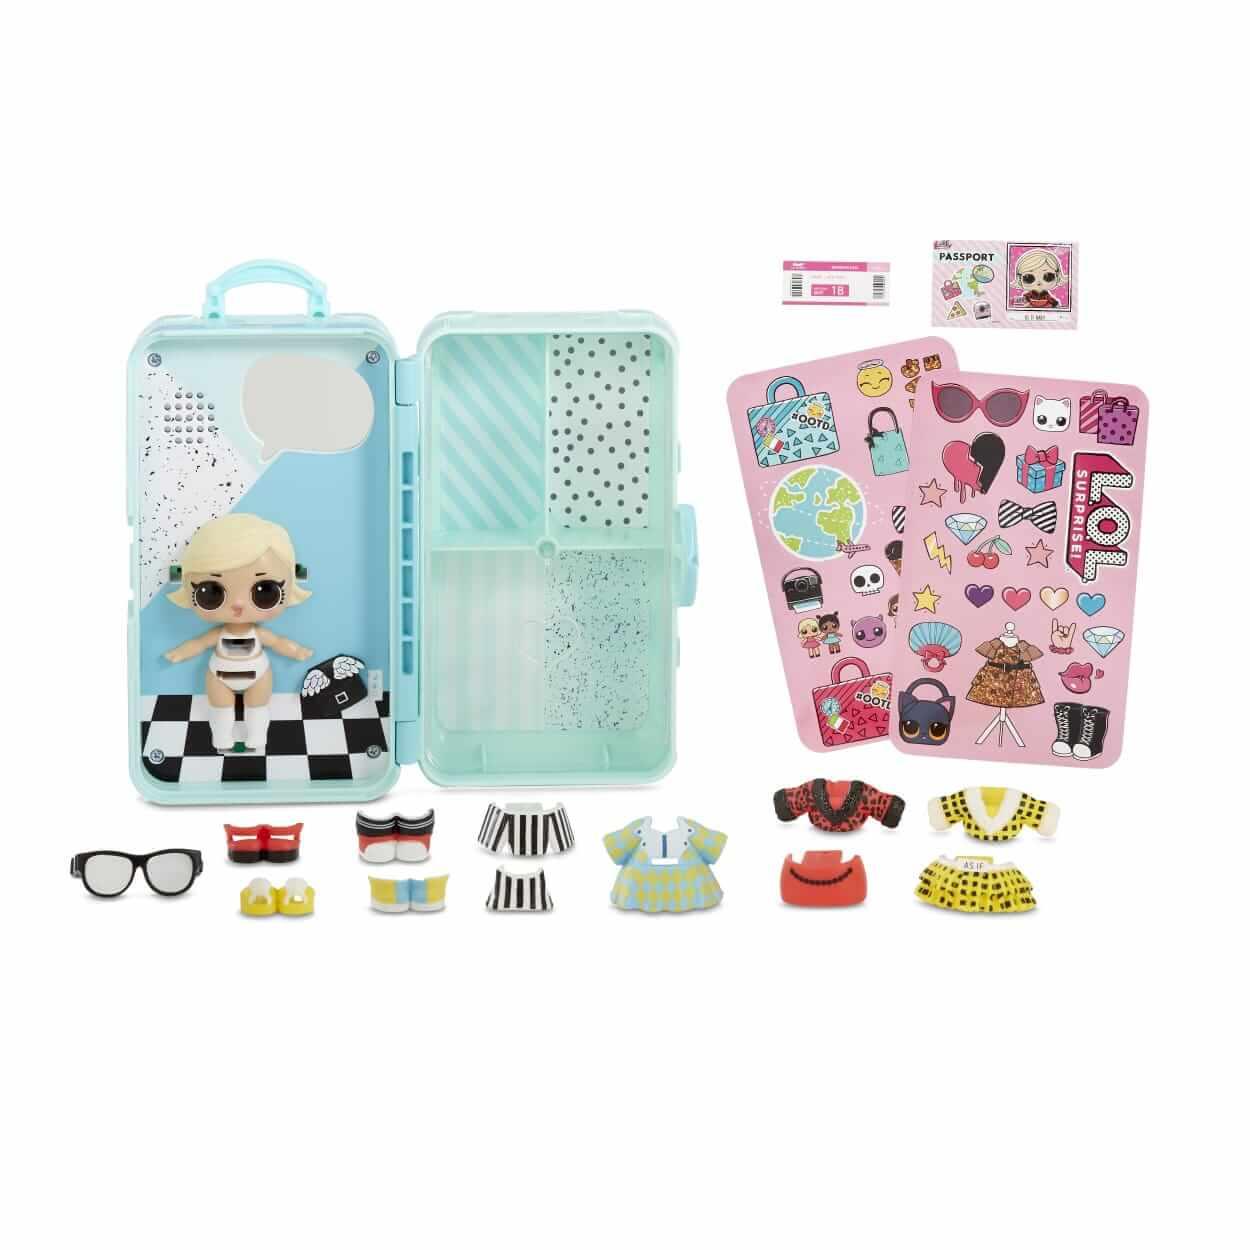 L.O.L. Surprise! Style Suitcase – As if baby